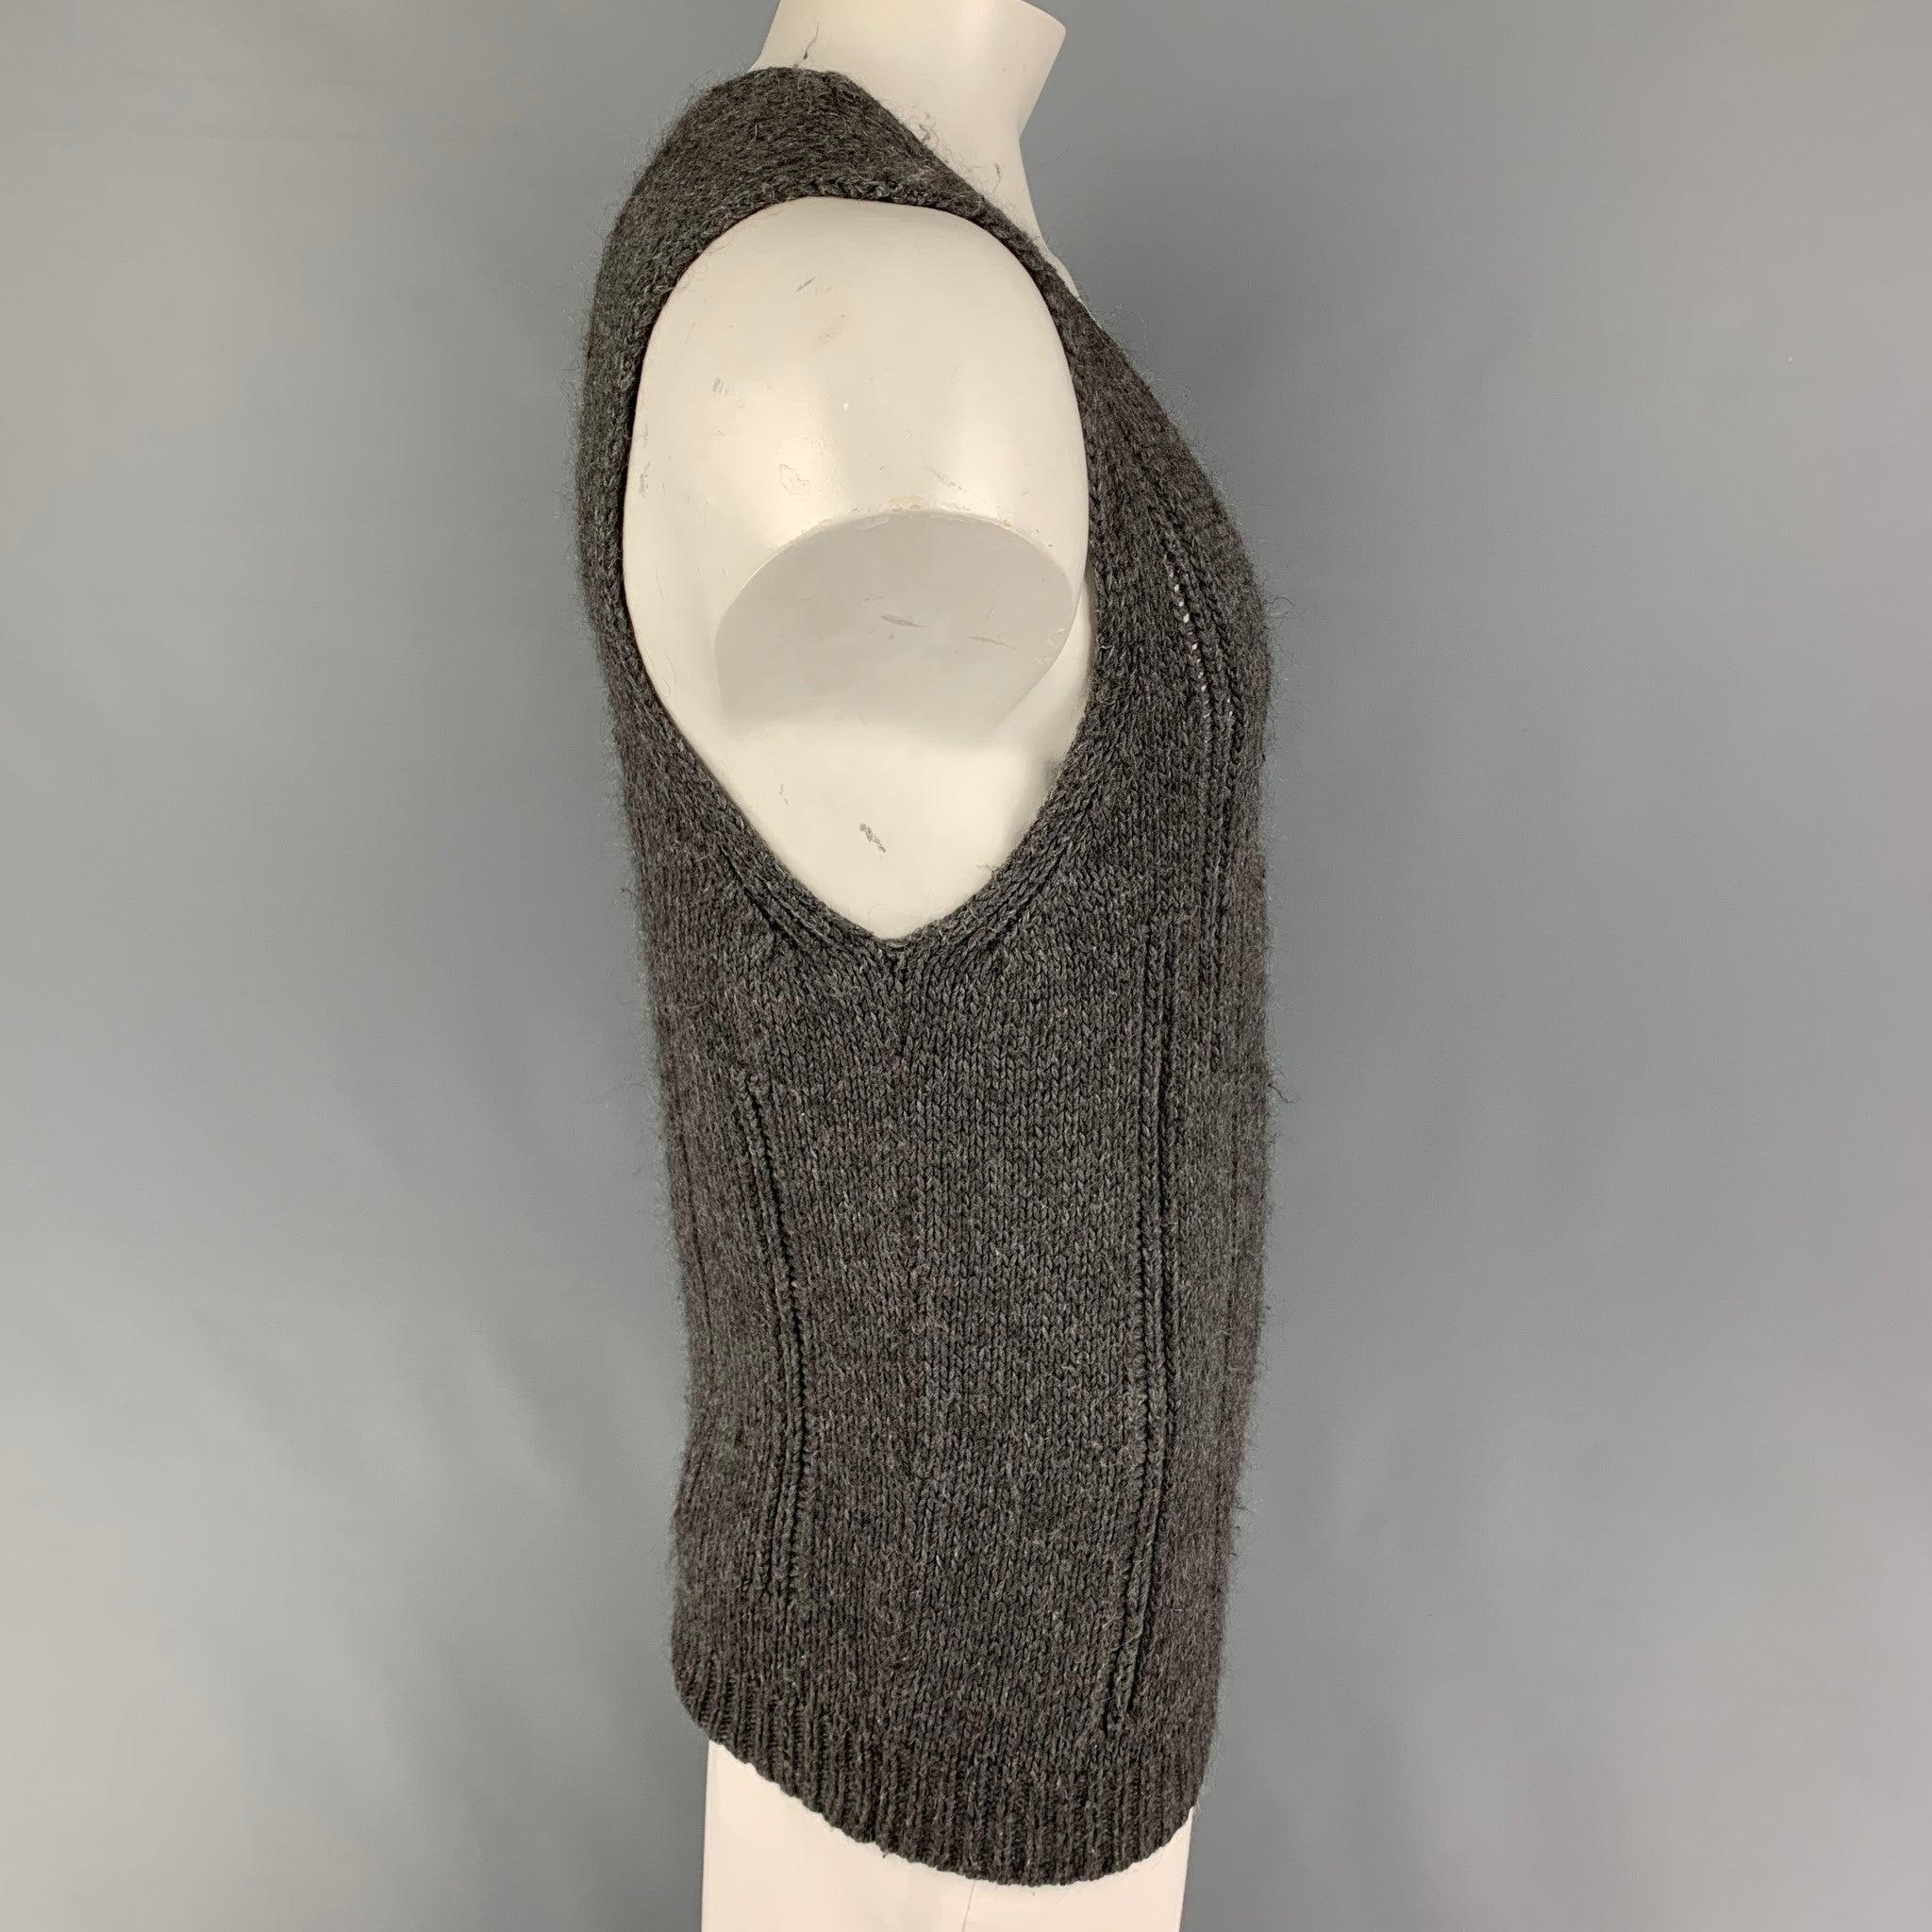 HUGO BOSS vest comes in a grey knit wool blend featuring a v-neck.
Very Good
Pre-Owned Condition. 

Marked:   Side tag removed 

Measurements: 
 
Shoulder:
17.5 inches  Chest: 40 inches  Length: 29.5 inches 
  
  
 
Reference: 122335
Category: Vest